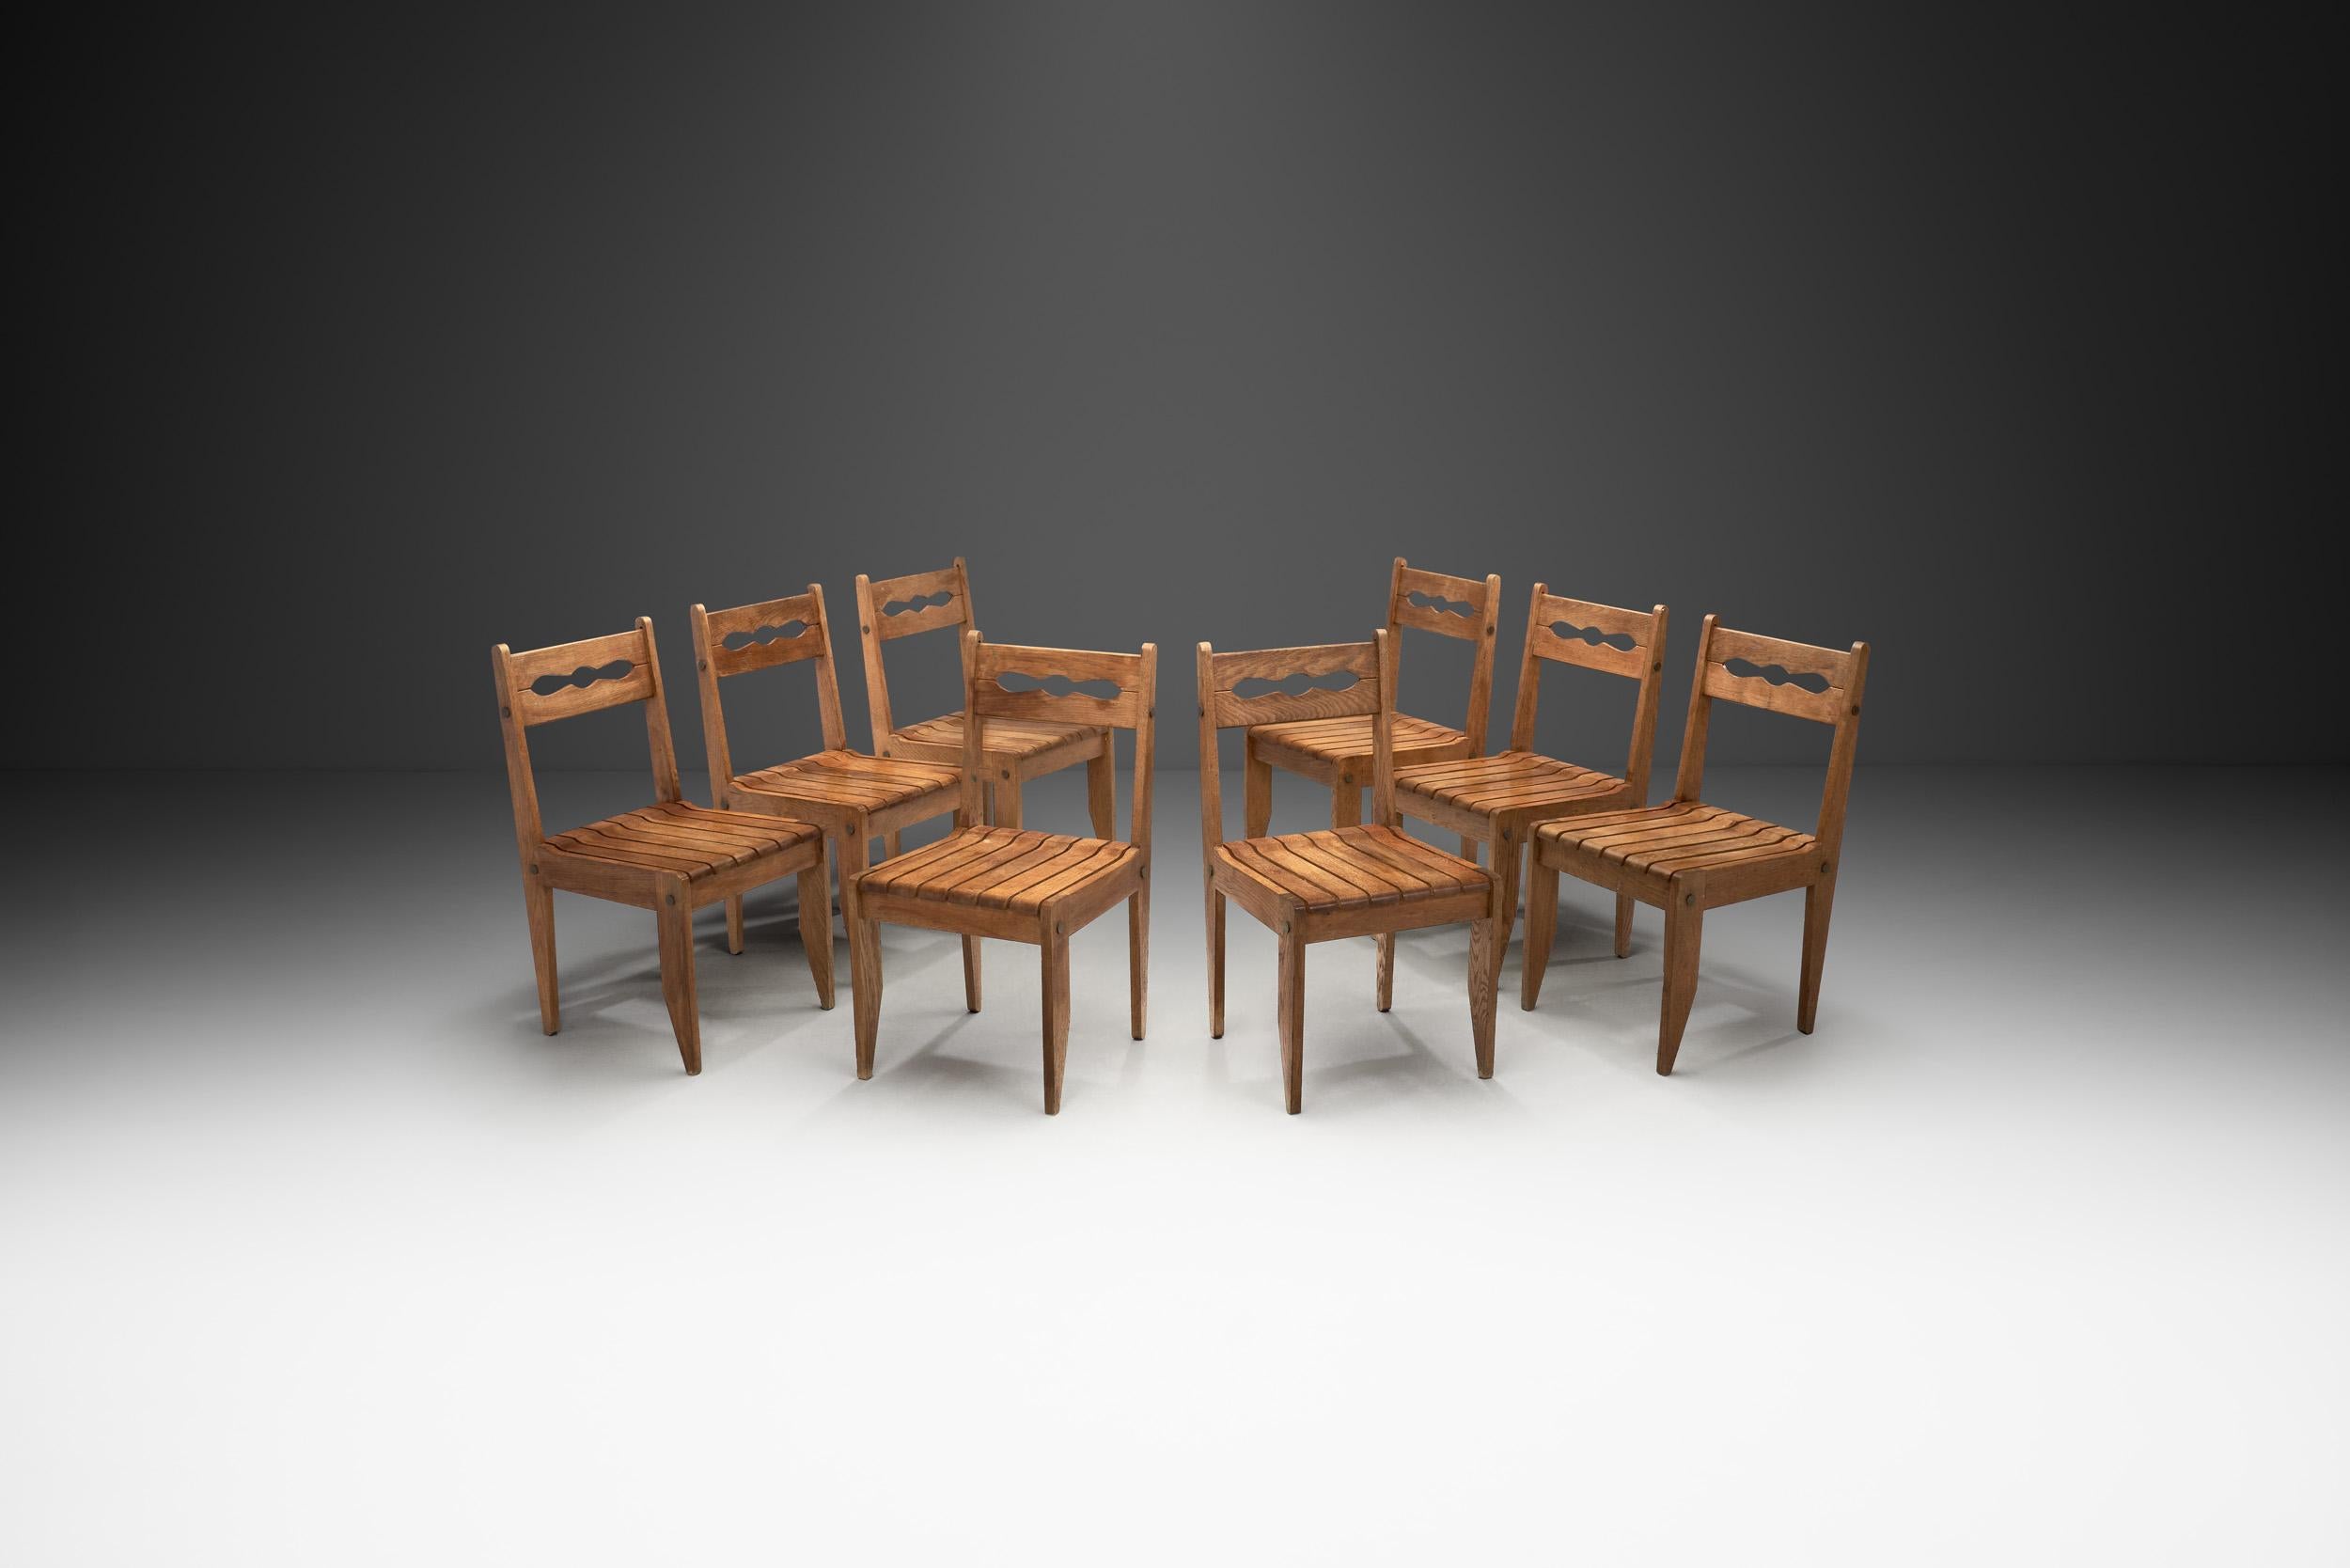 This rare set of eight chairs by the French designers, Guillerme et Chambron, has an elegant appearance combined with distinctive, rustic design elements. Beyond its aesthetic quality, this set is also a testament to the duo’s famous craftsmanship